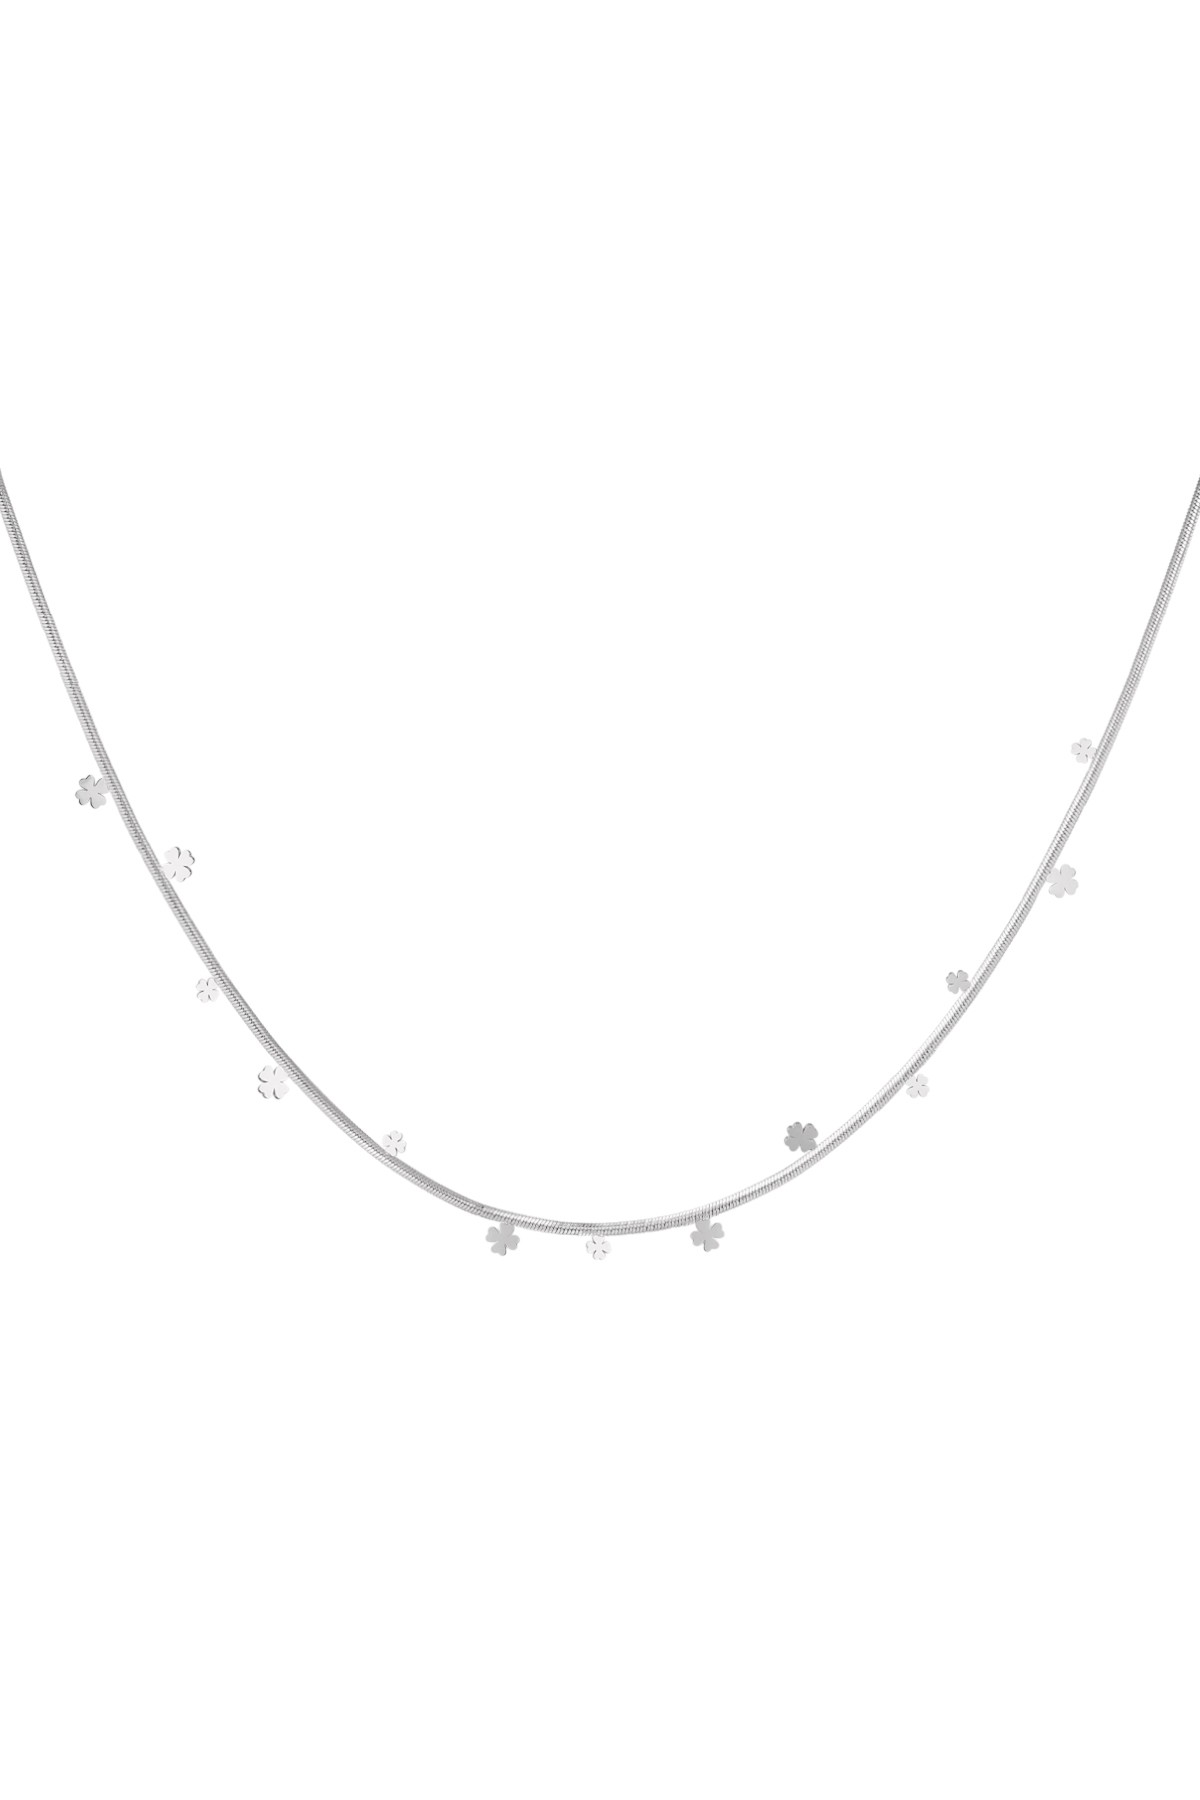 Clover party necklace - silver h5 